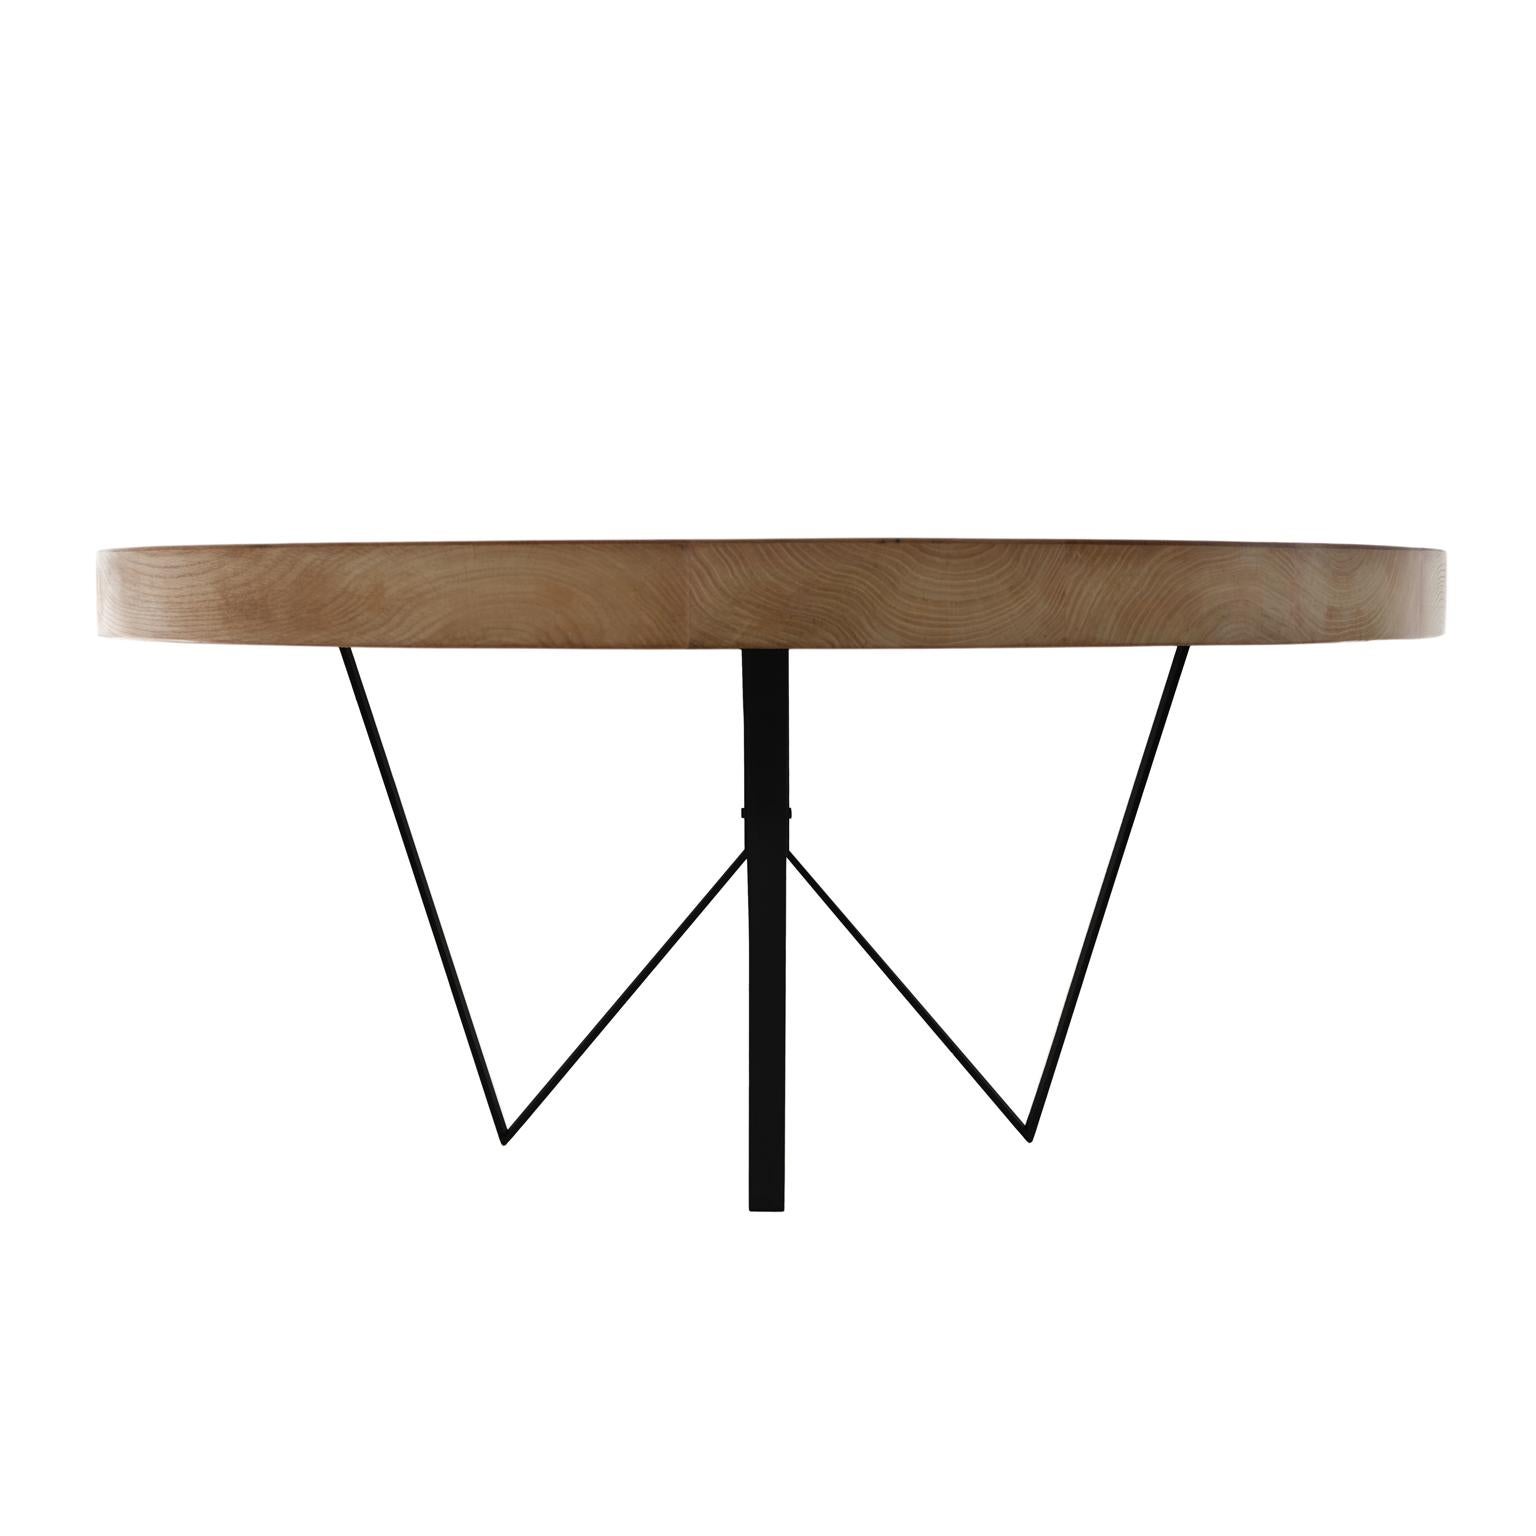 Maurits Reclaimed Oak Round Dining Table by Fred and Juul
Dimensions: Ø 160 x H 78 cm.
Materials: Reclaimed oak and black metal.

Available in round or stadium shape. Also available in different materials. Custom sizes, materials or finishes are